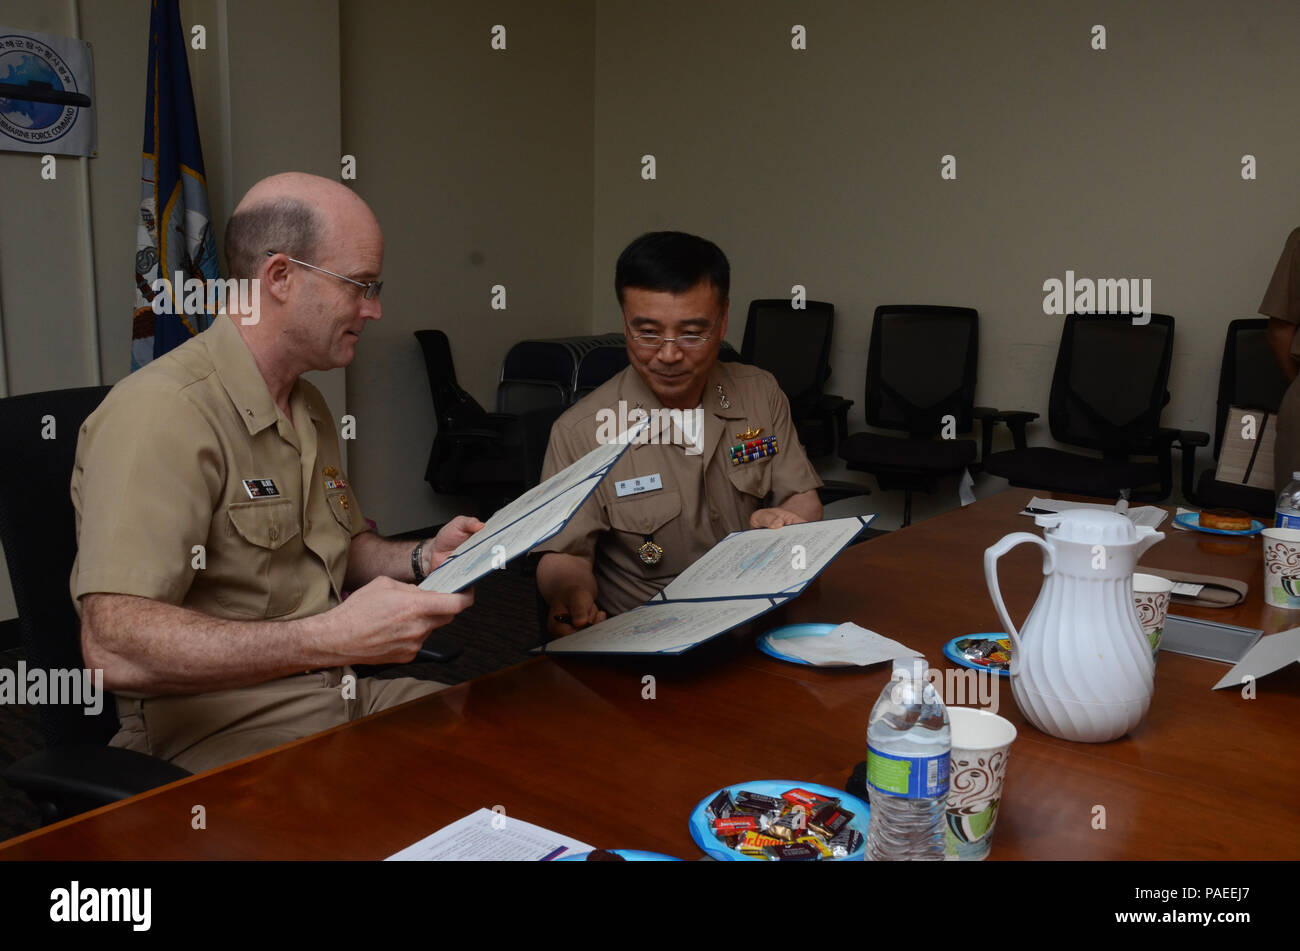 160331-N-YM720-264 SANTA RITA, Guam (March 31, 2016) Rear Adm. William Merz, commander, Submarine Group 7, left, and Rear Adm. Youn Jeong Sang, commander, Submarine Force, Republic of Korea Navy (ROKN), sign a formal agreement at the conclusion of the 43rd Submarine Warfare Committee Meeting (SWCM) reaffirming the longstanding relationship between the two countries and pledging continued support between the two submarine forces. SWCM is a bilateral discussion between the U.S. and ROKN submarine forces designed to foster the partnership and focuses on submarine tactics, force integraton and fut Stock Photo